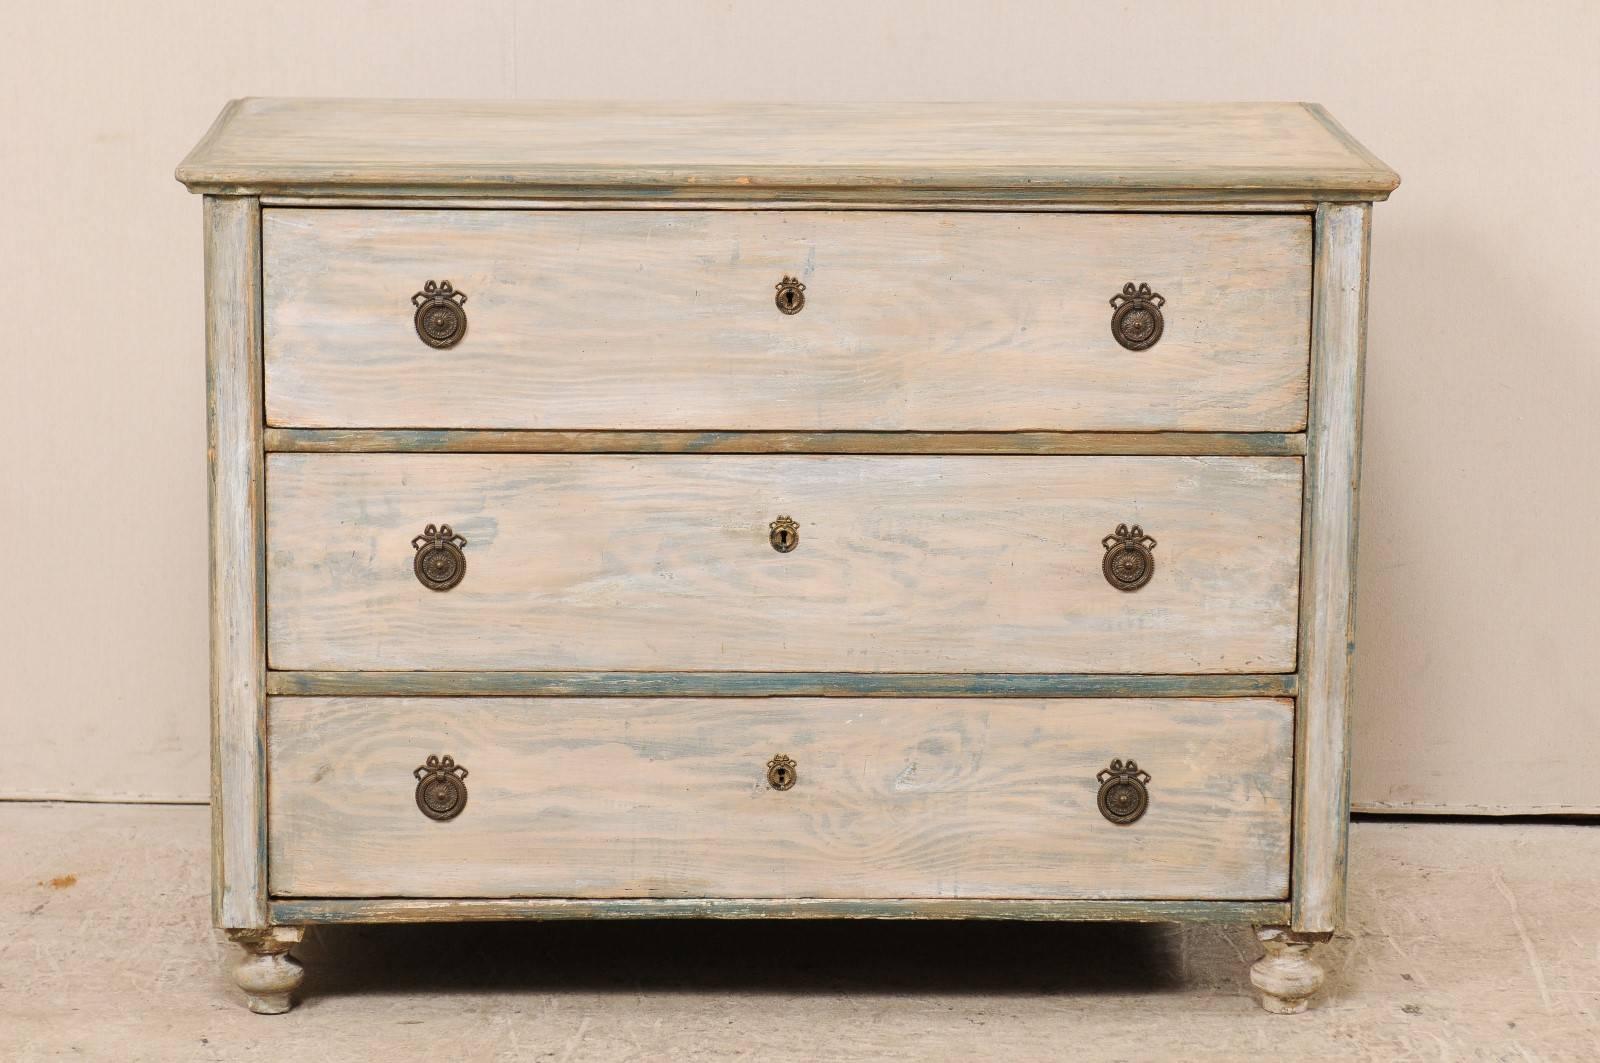 A Swedish 19th century Karl Johan three-drawer painted wood chest. This antique Swedish chest features three dovetailed graduated drawers, a slightly overhanging and beveled top and is raised on bun feet. The drawers are adorn with ring pulls and